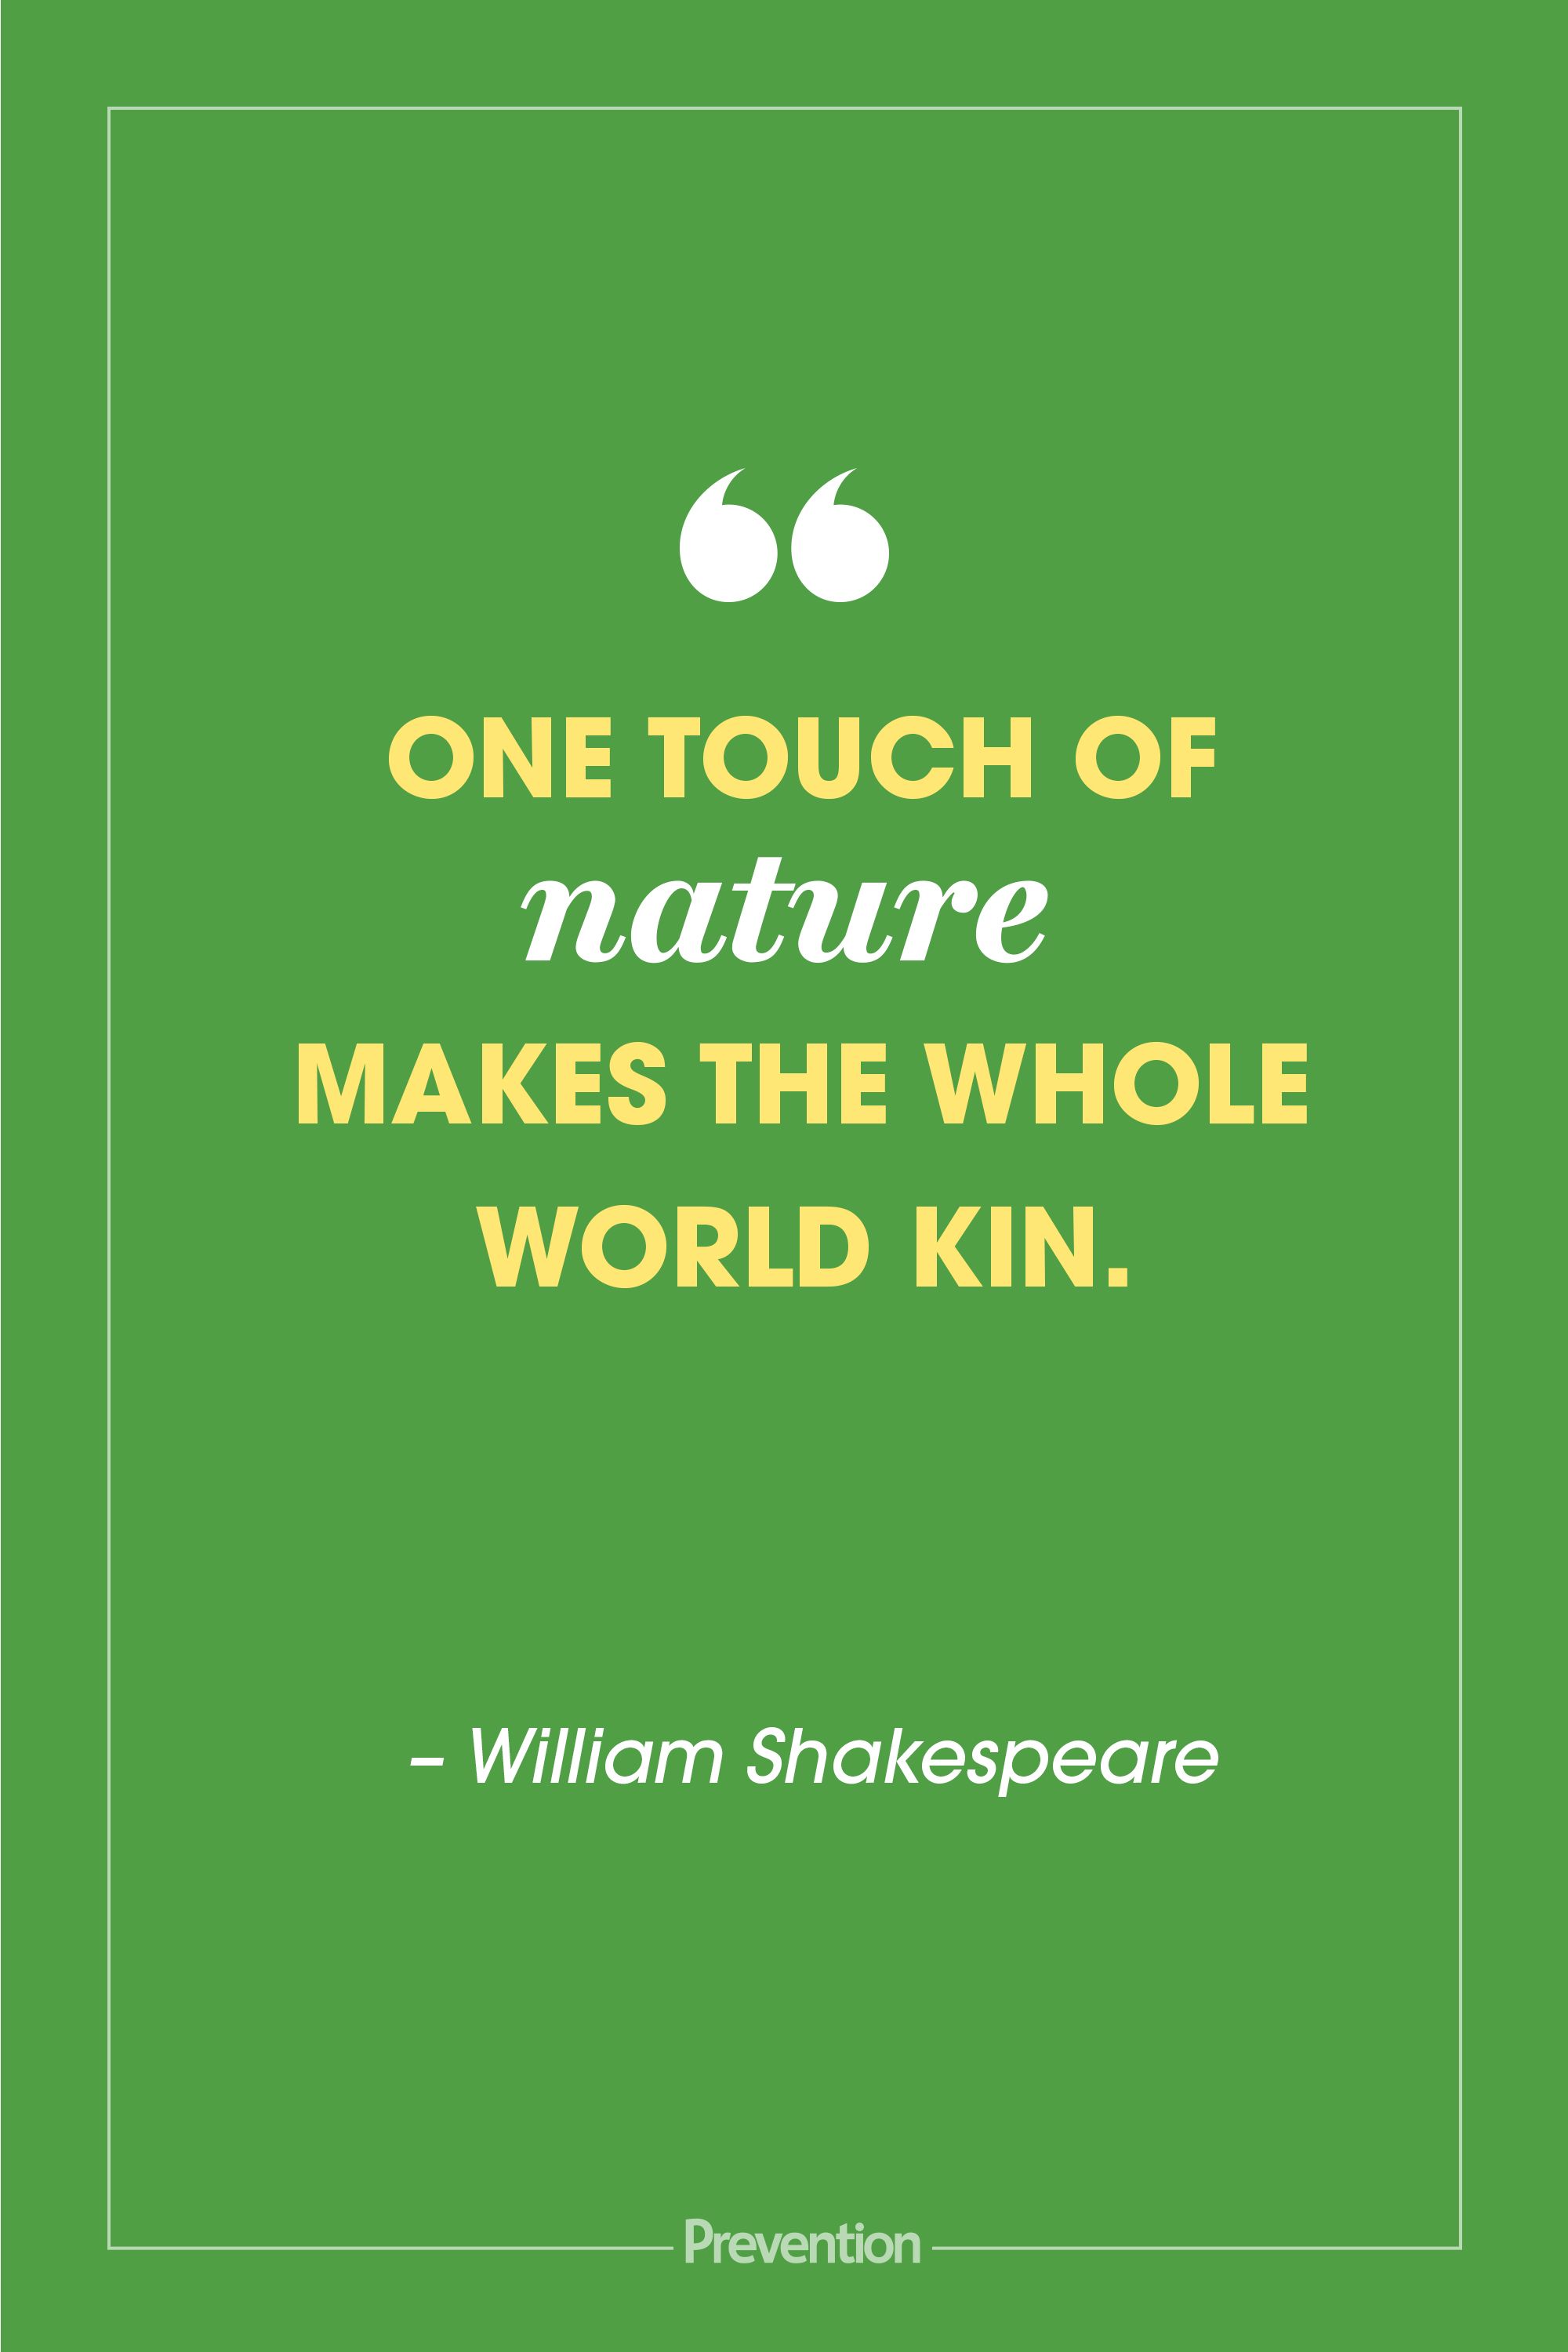 quotes about nature green